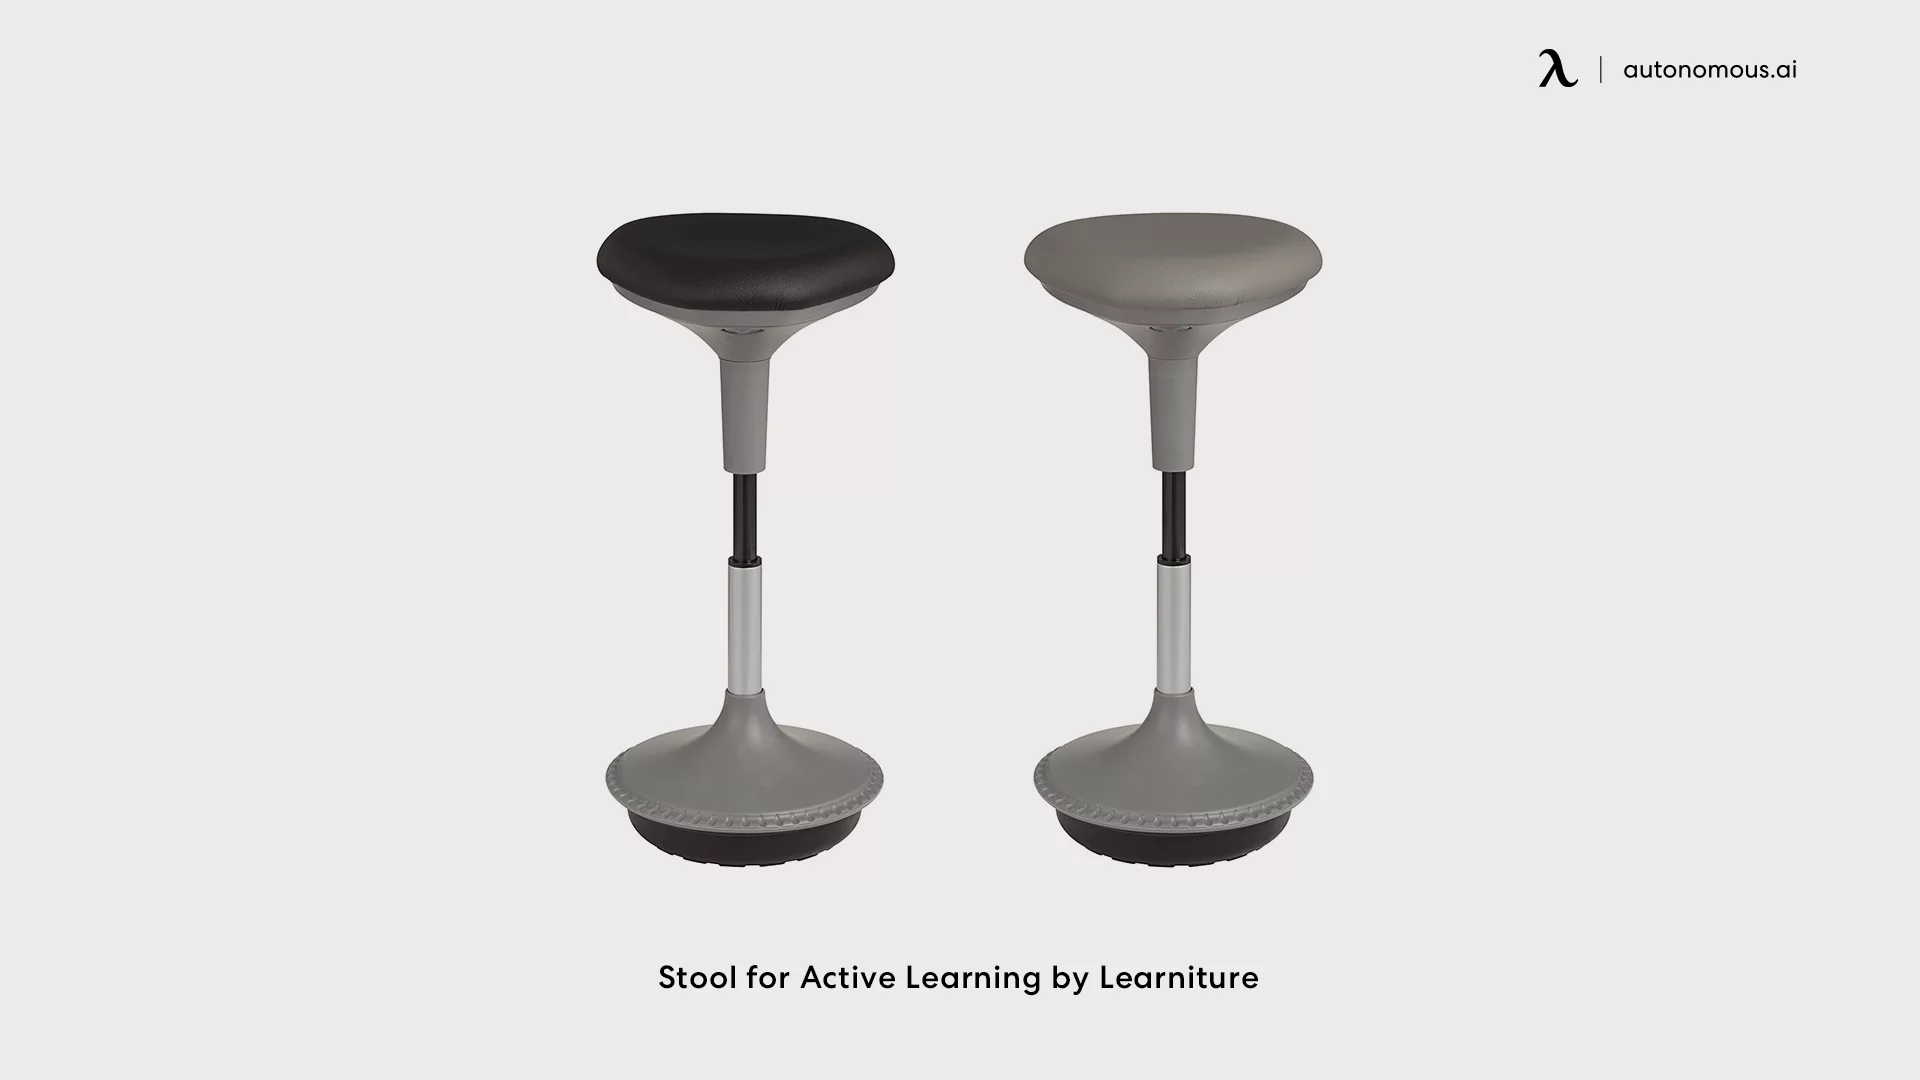 Stool for Active Learning by Learniture